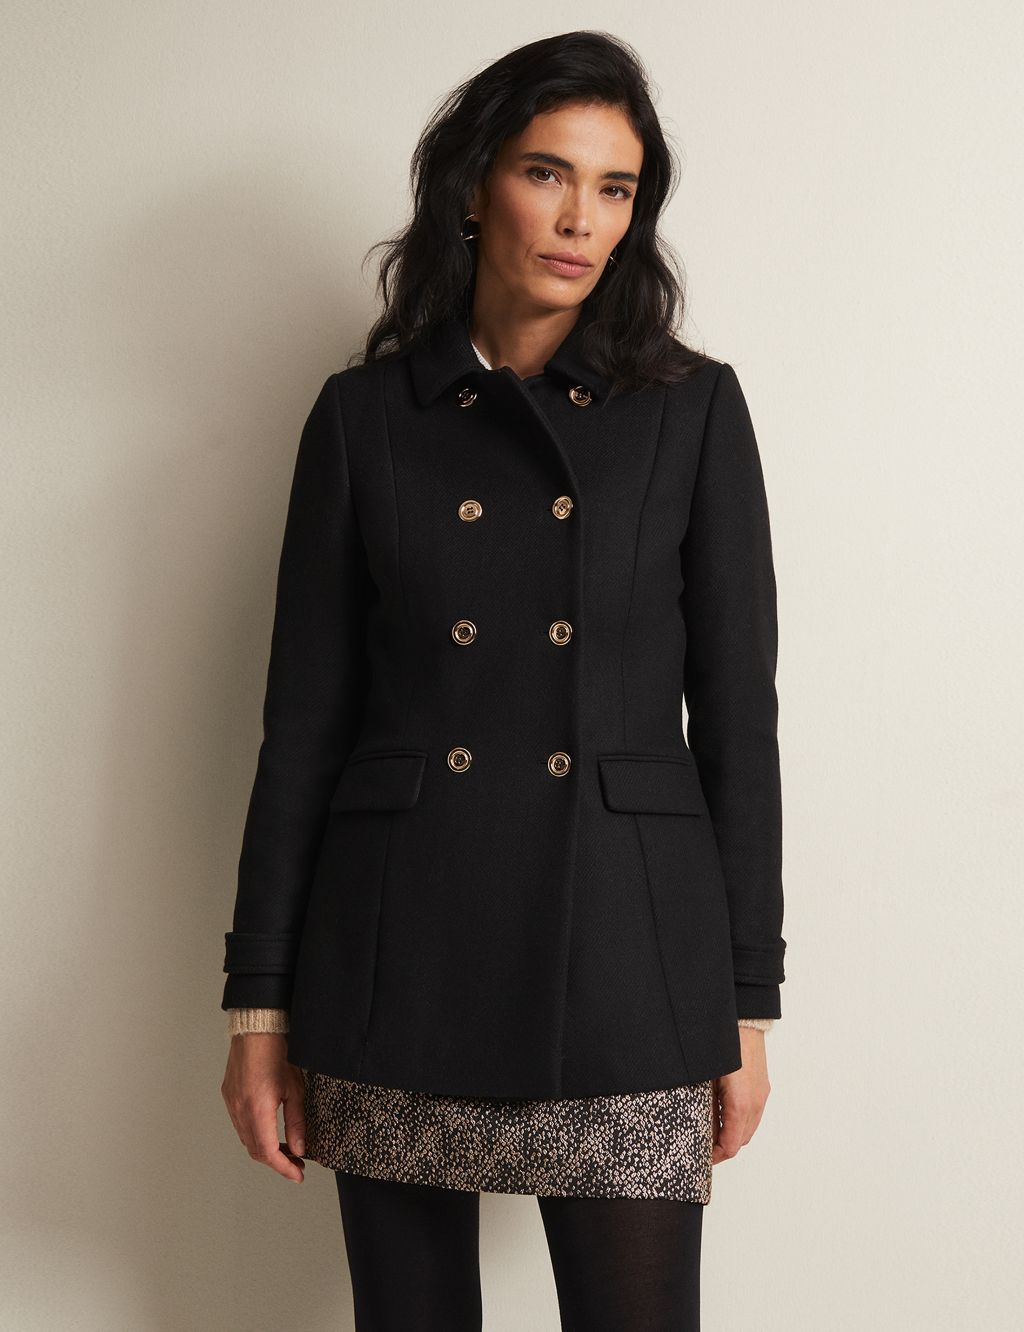 Wool Blend Double Breasted Pea Coat | Phase Eight | M&S